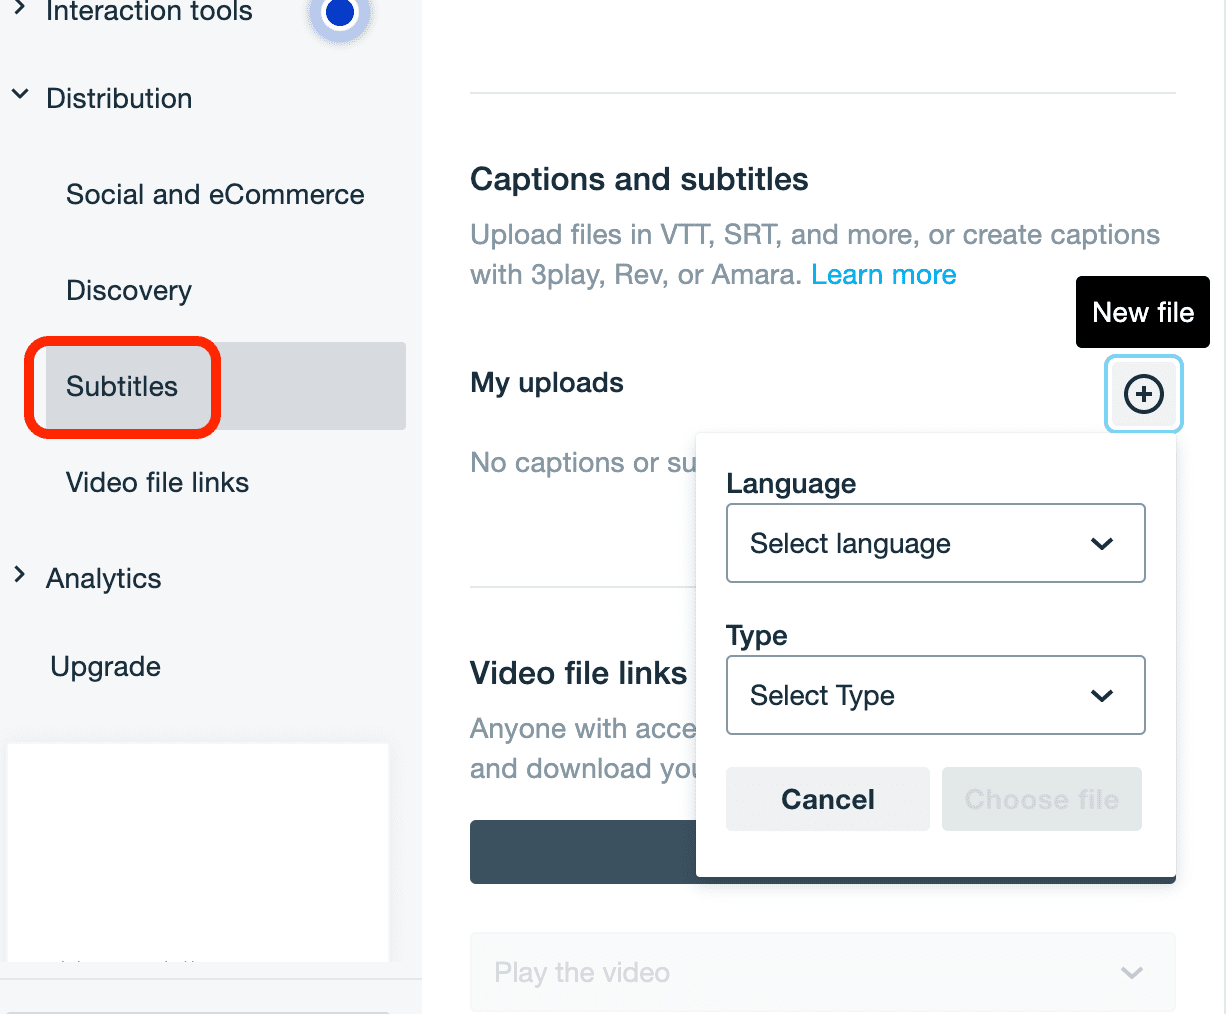 Subtitle options for Vimeo accessibility